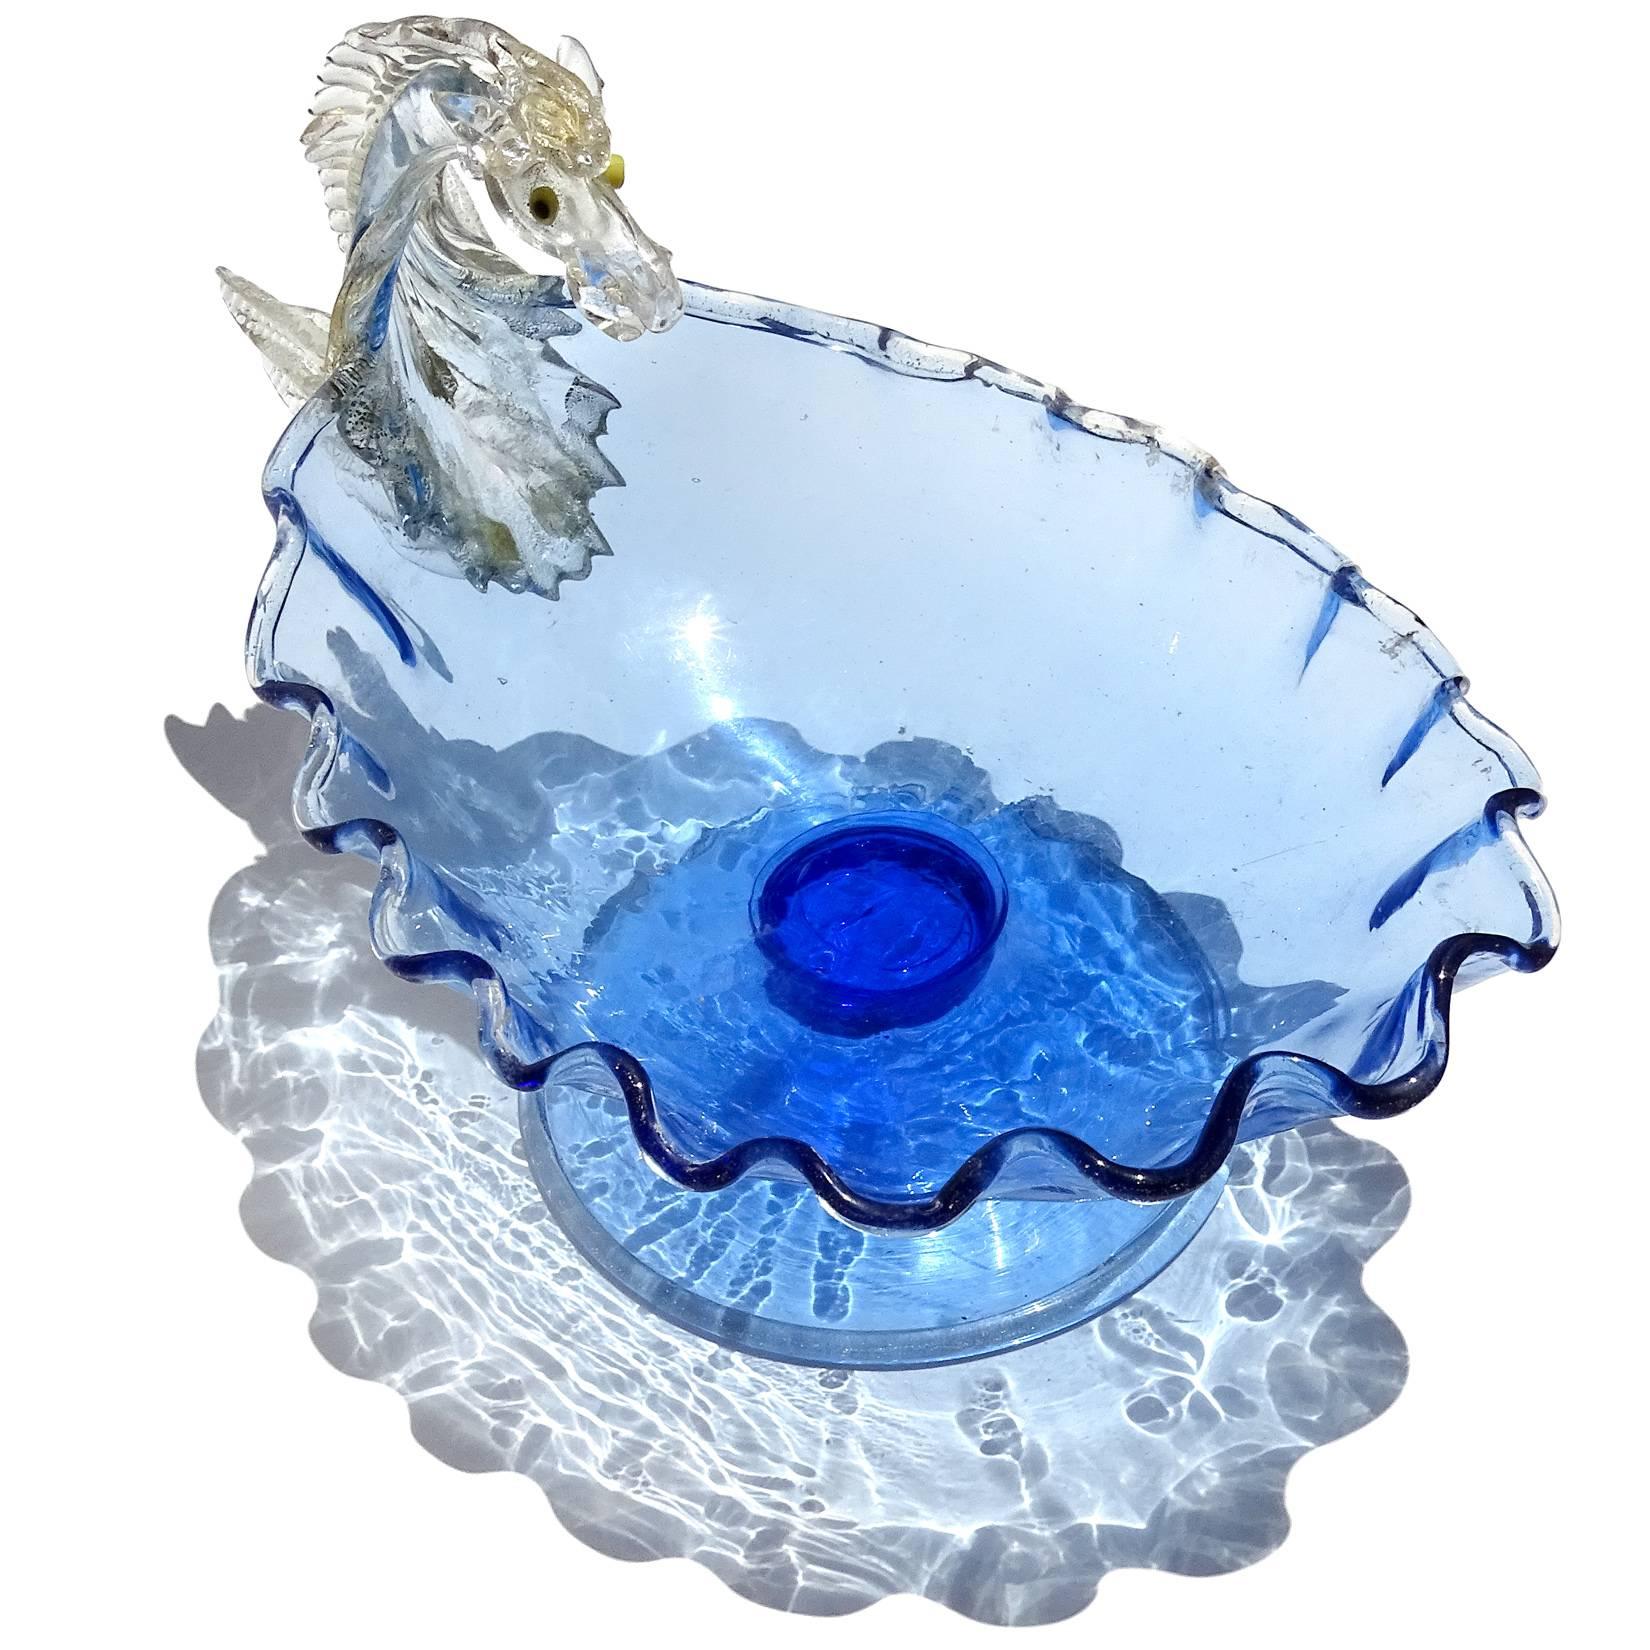 Antique early Venetian cobalt blue with gold accents Italian art glass Pegasus horse compote bowl. Attributed to the Artisti Barovier / Fratelli Toso companies, as published in the book 